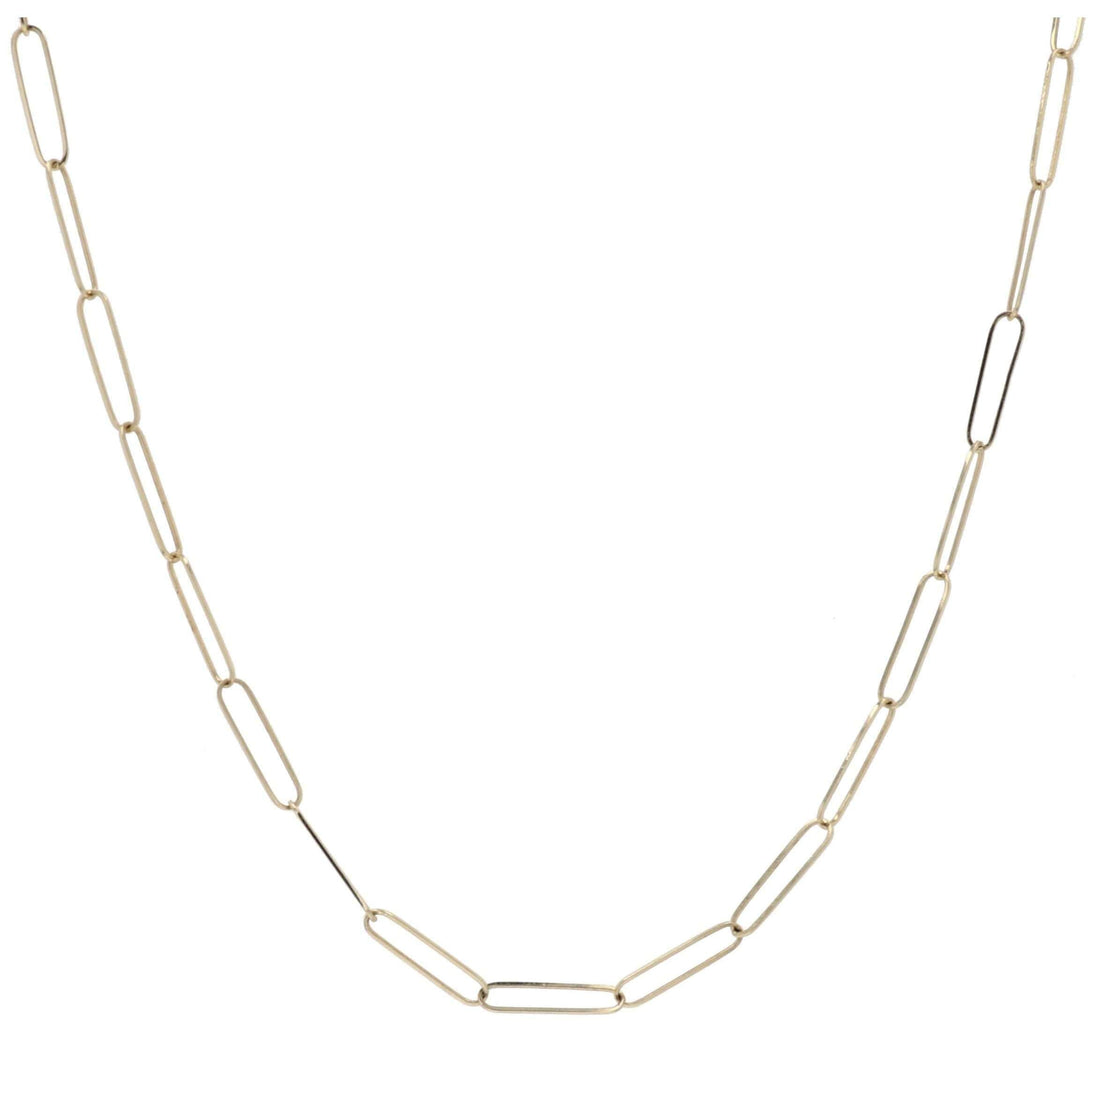 Midas Yellow Gold Paperclip Chain Necklace - Skeie's Jewelers